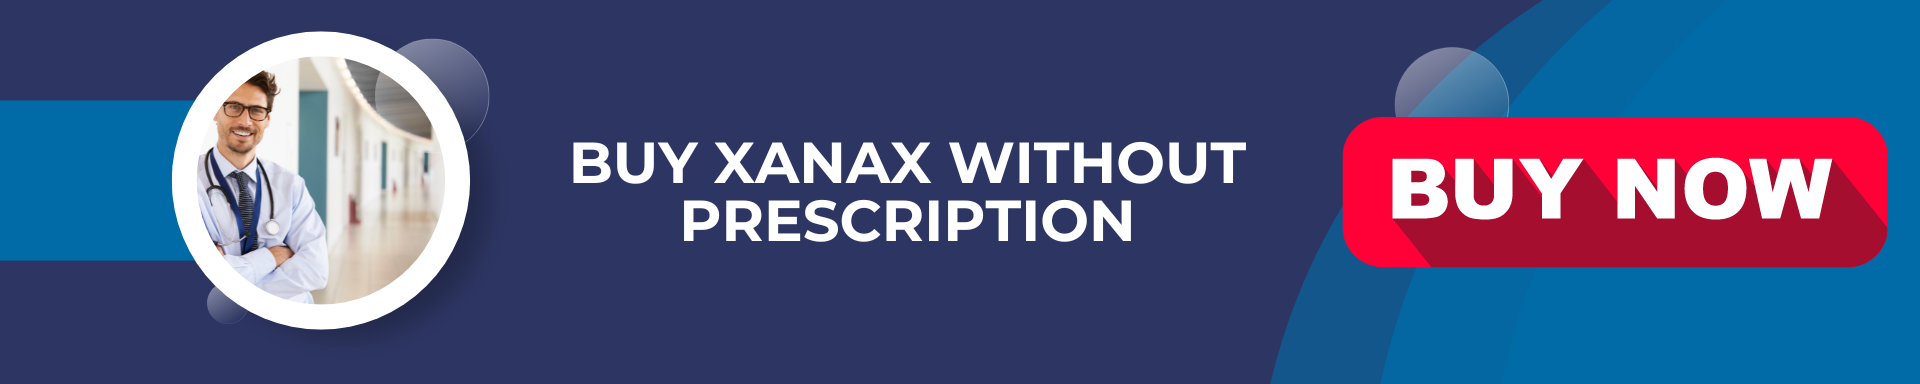 Buy Xanax without prescription